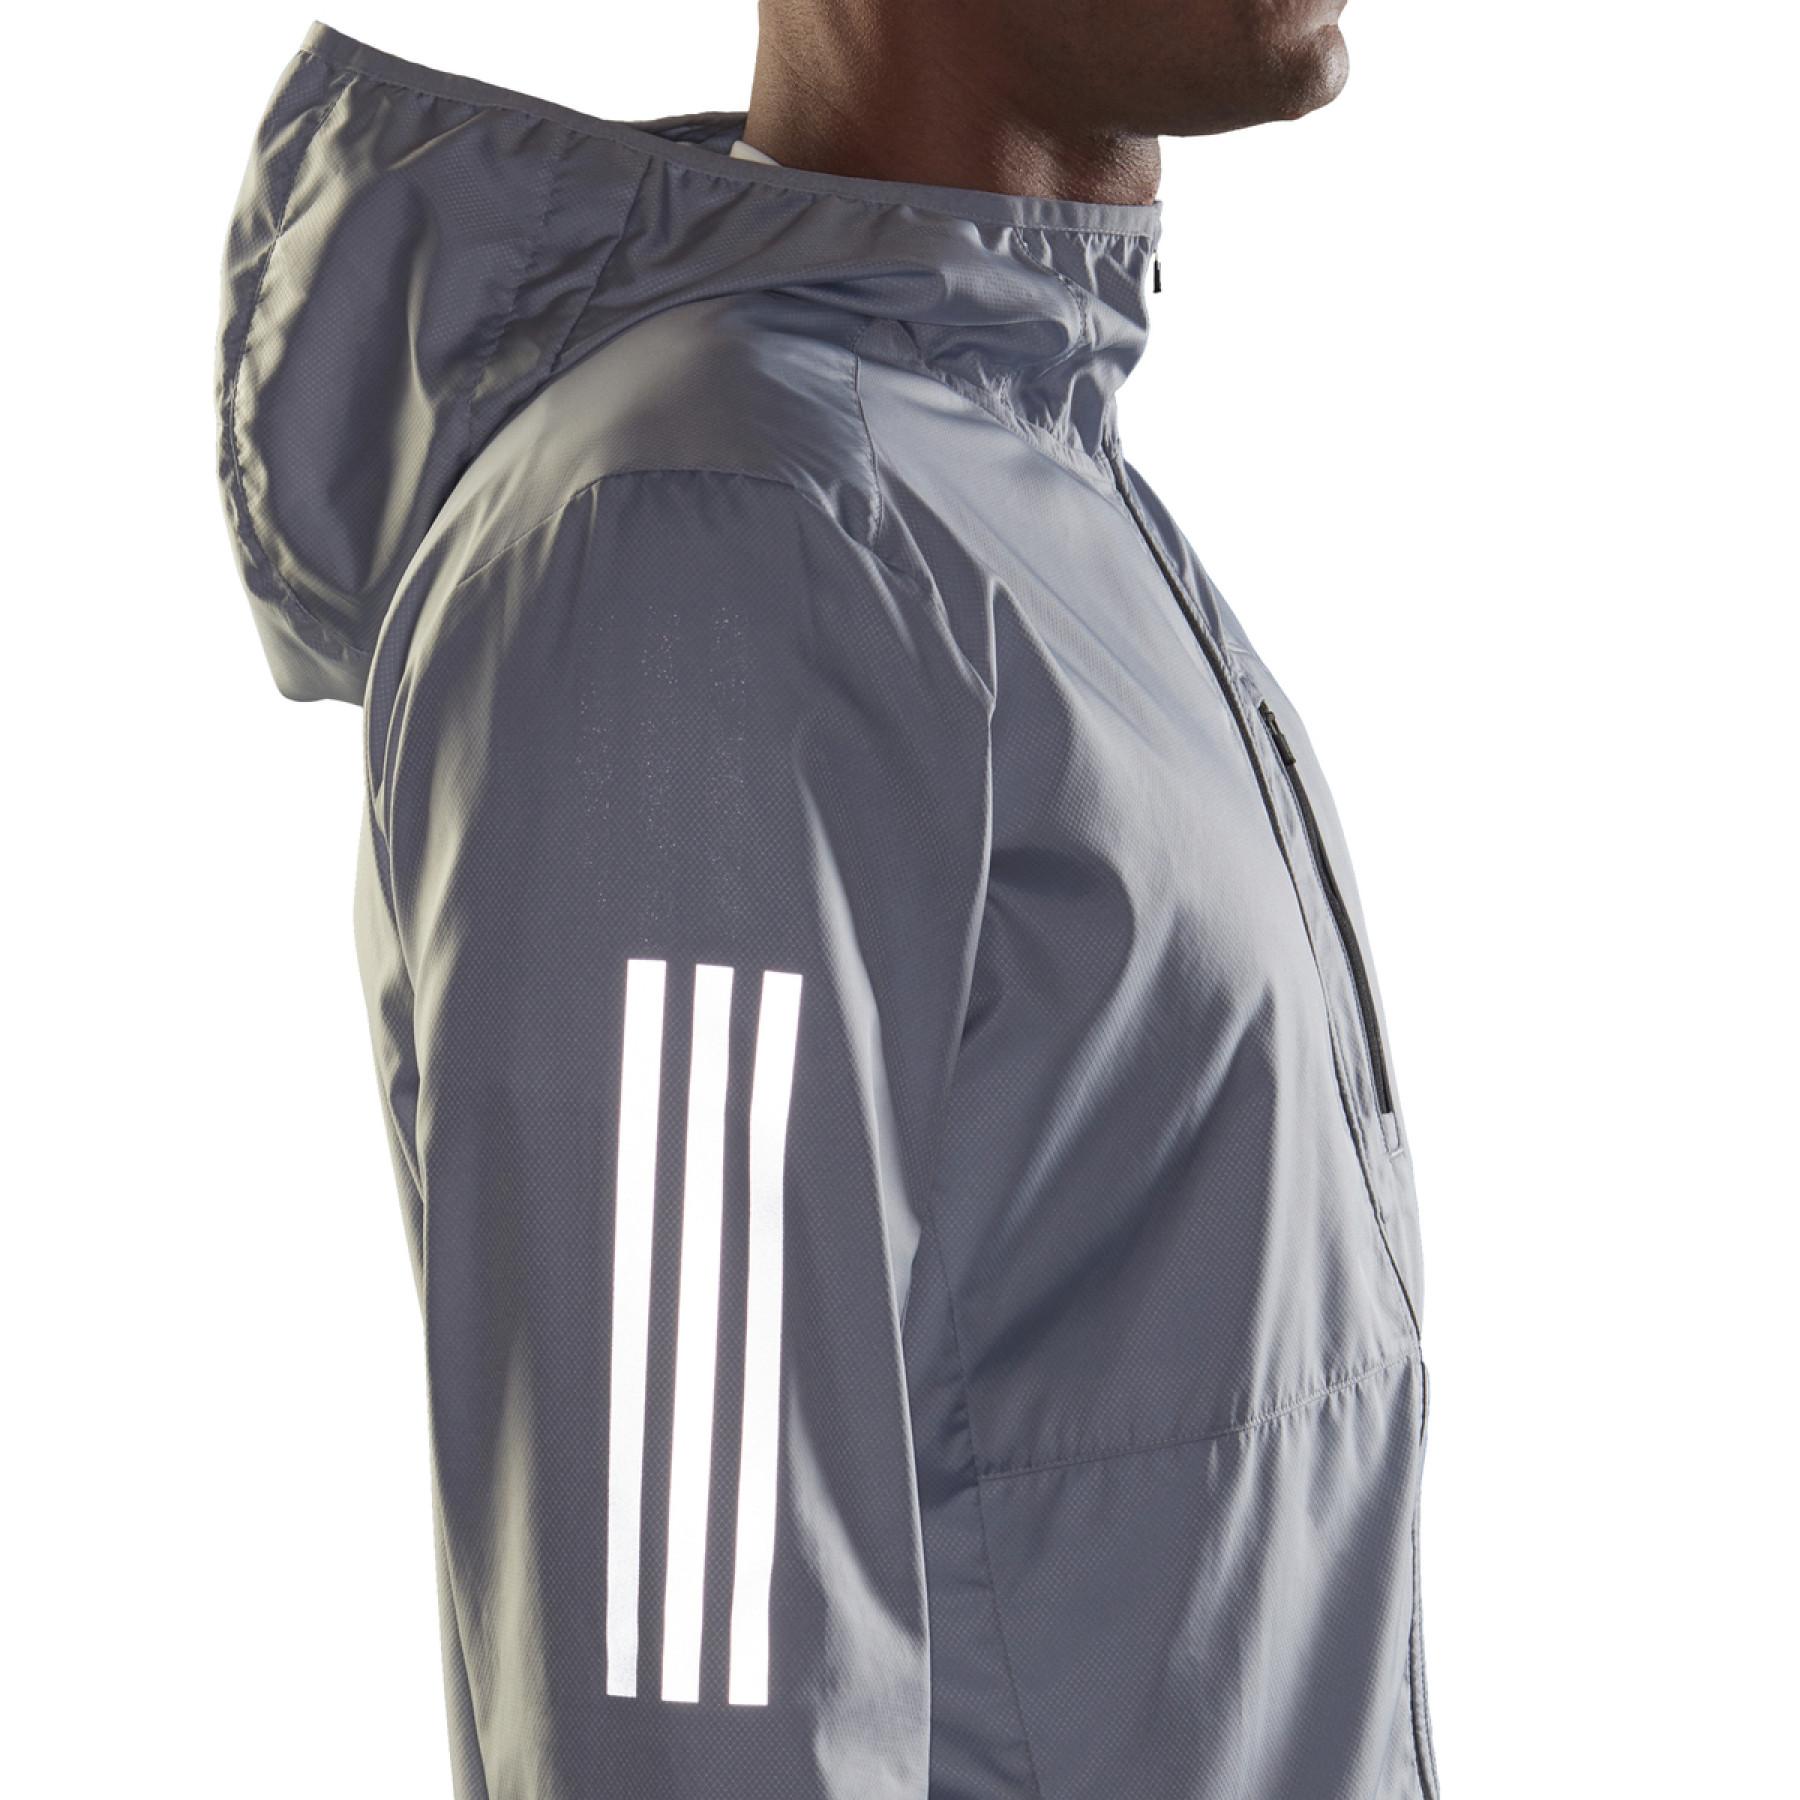 Giacca adidas Own the Run Hooded Wind